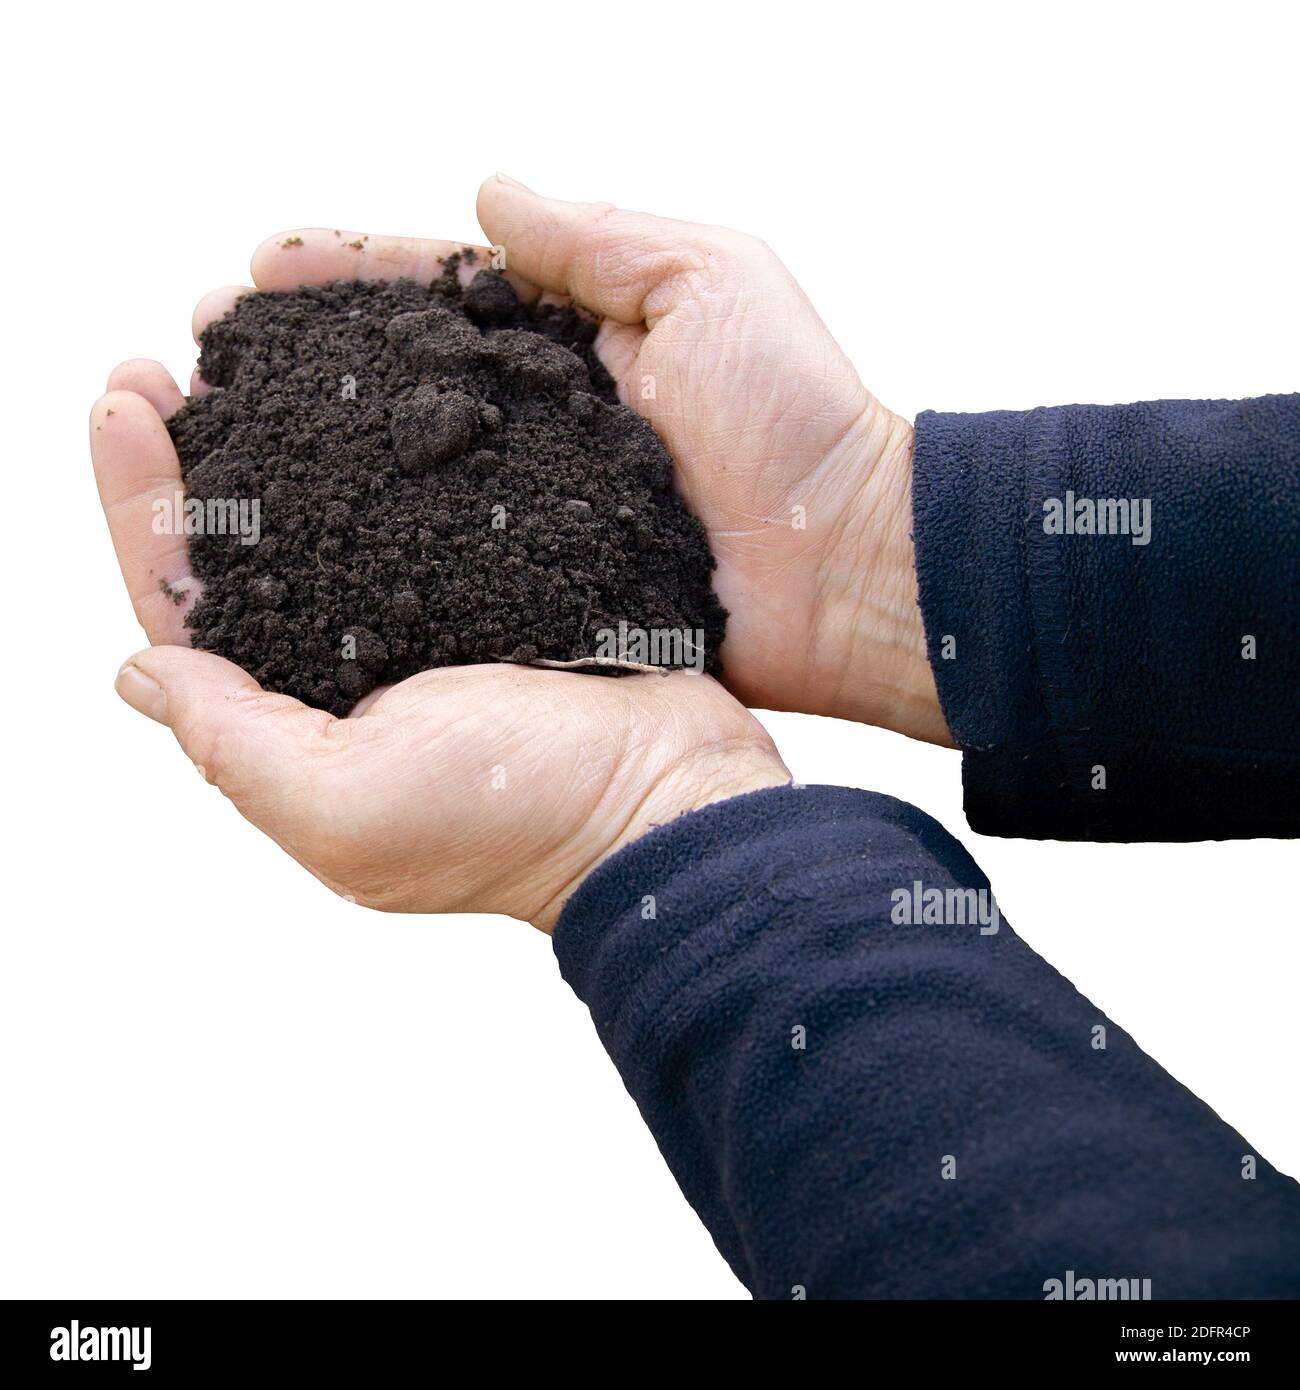 Farmer holding soil in hands close-up. View from above. Agriculture, gardening. Stock Photo